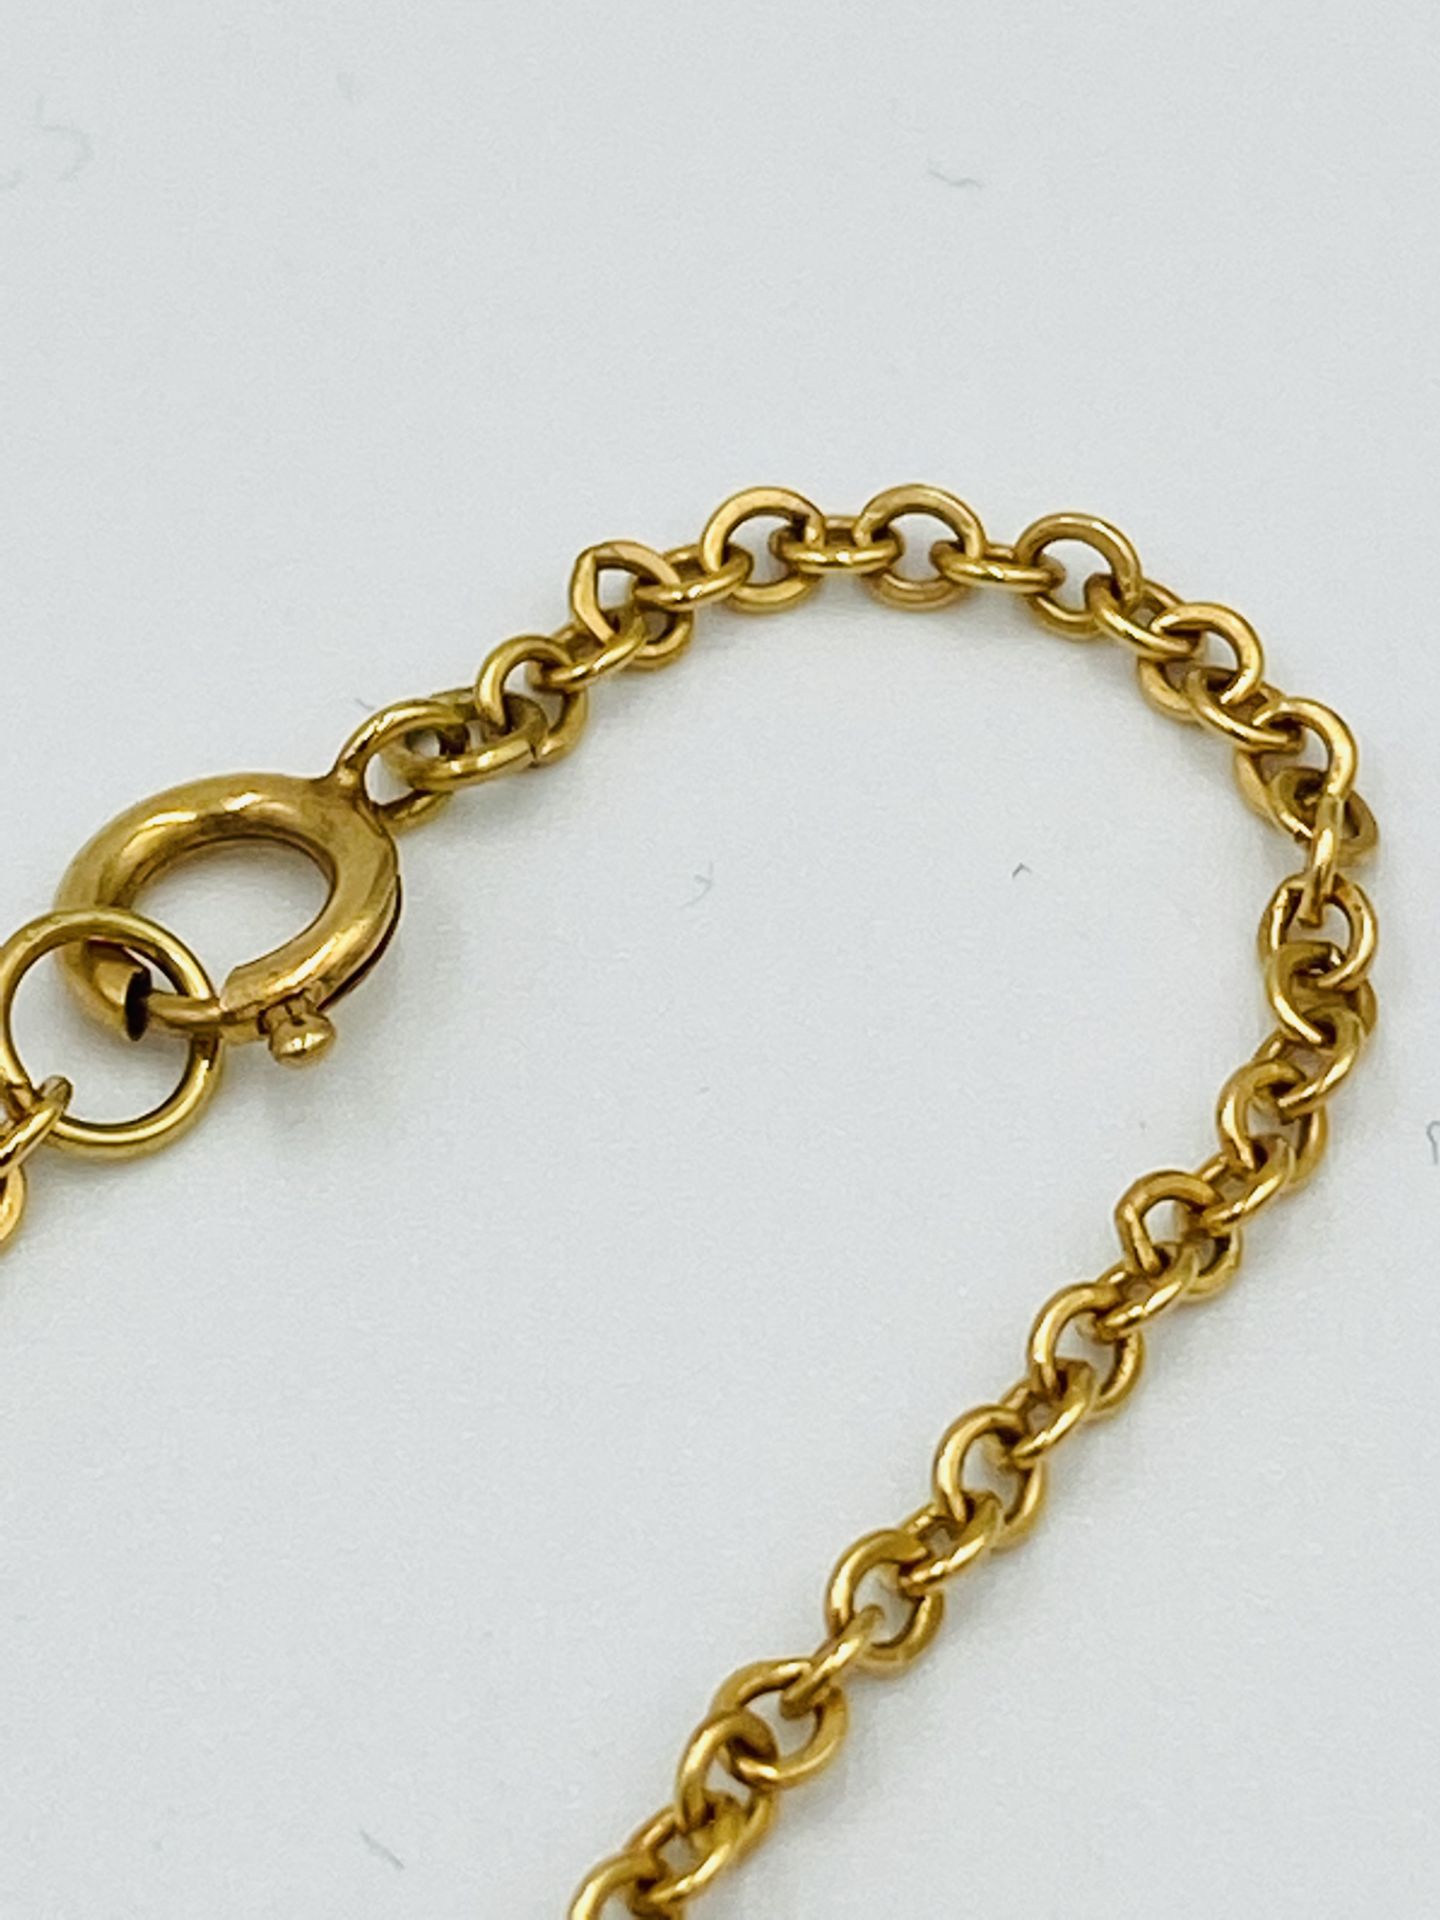 9ct gold pendant and chain - Image 4 of 4